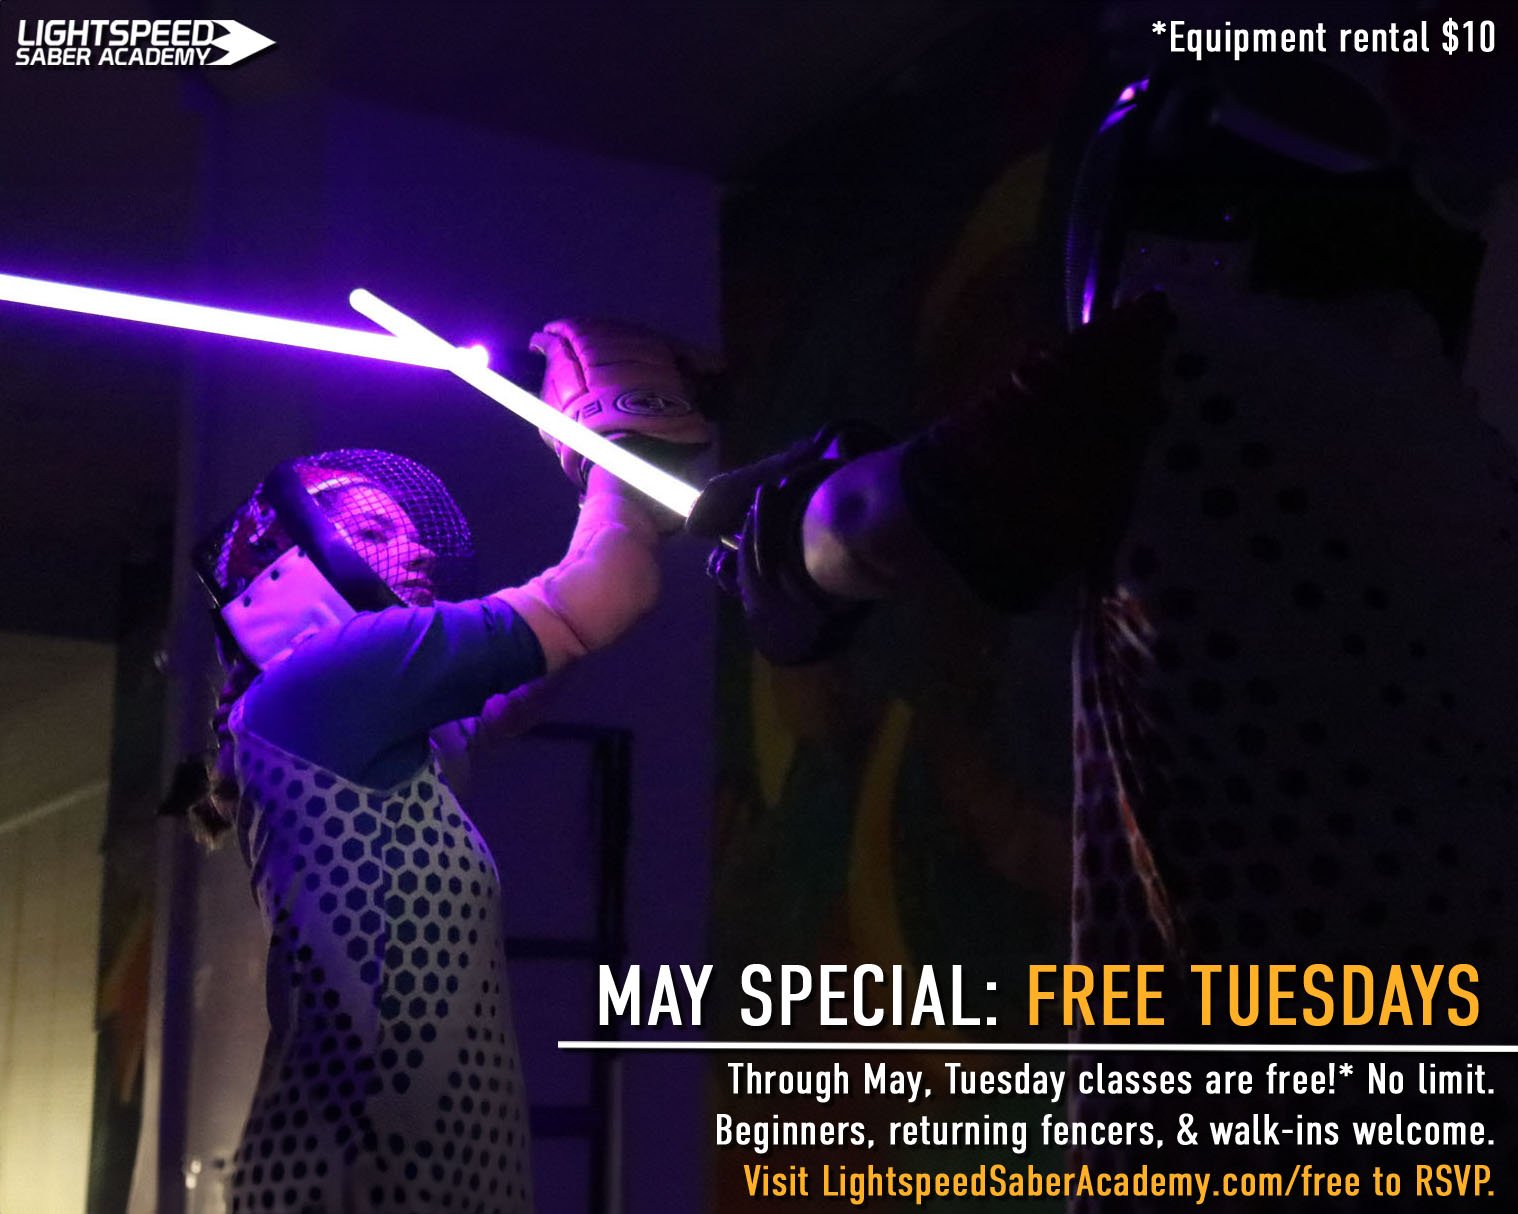 Come try the amazing new sport of Lightspeed Saber fencing! Our latest promotion lets you get in on the action all month long for free, Tuesdays at 7 PM. Get fit, get hit, hit back!
Our classes run for about one hour, with about an hour of optional o